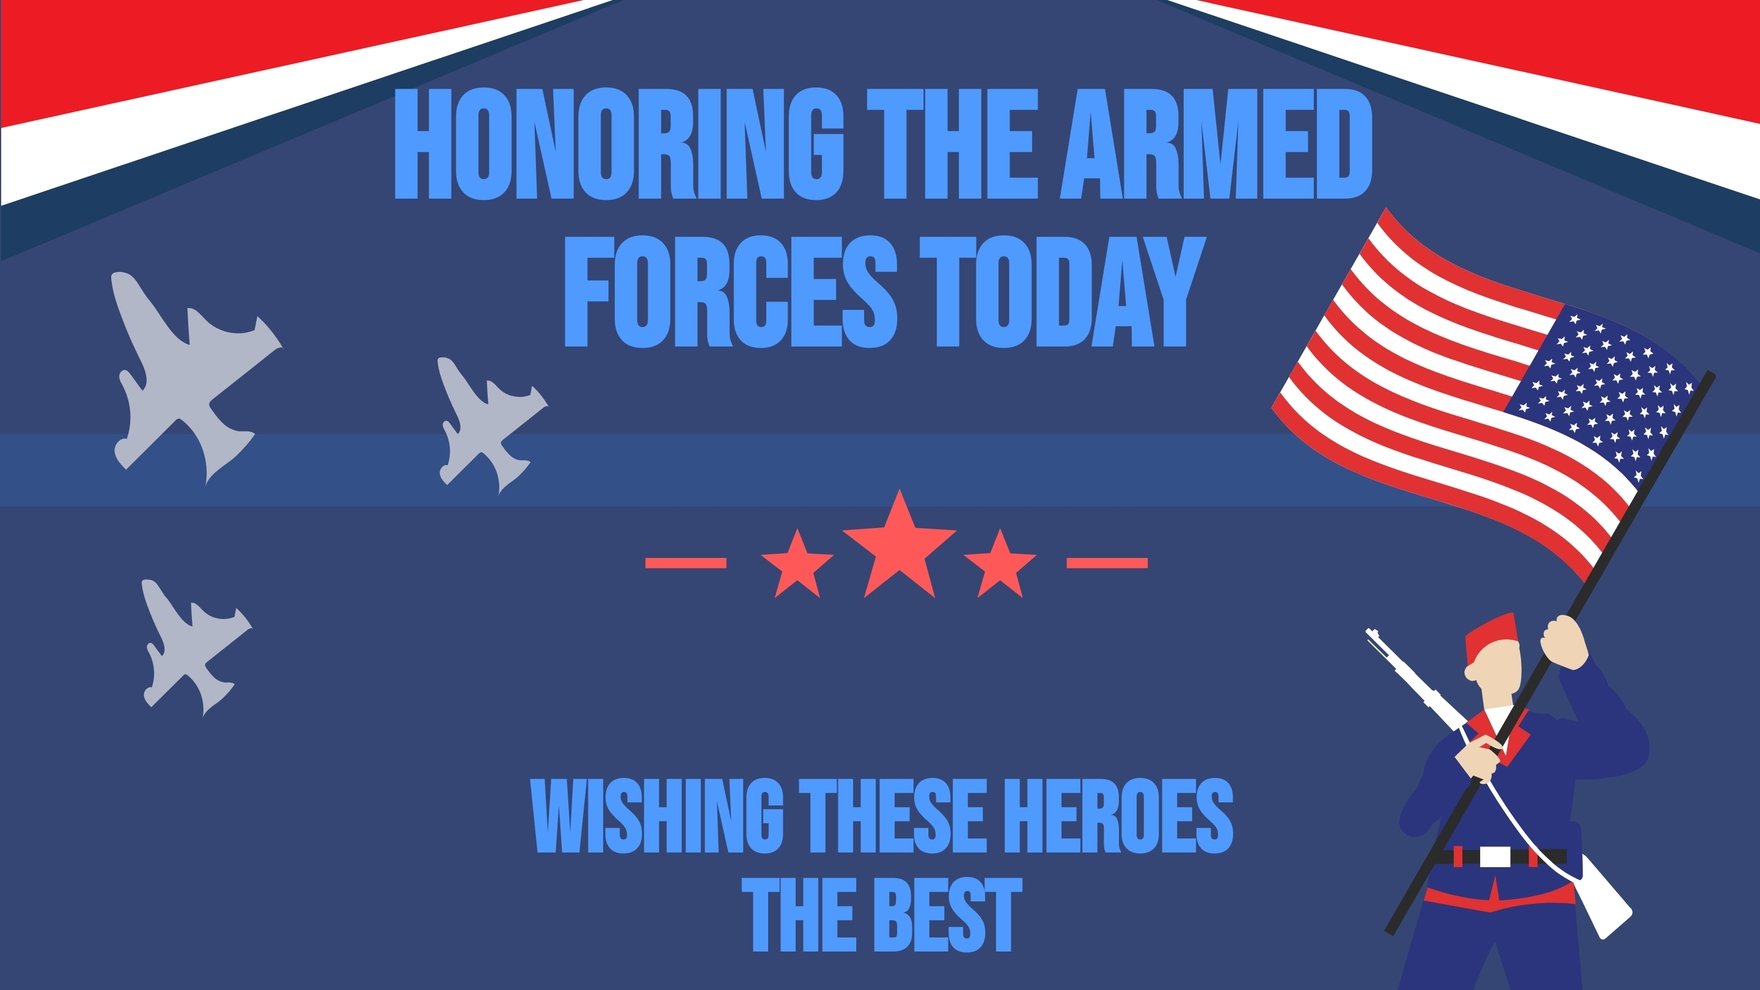 Armed Forces Day Wishes Background in PDF, Illustrator, PSD, EPS, SVG, JPG, PNG